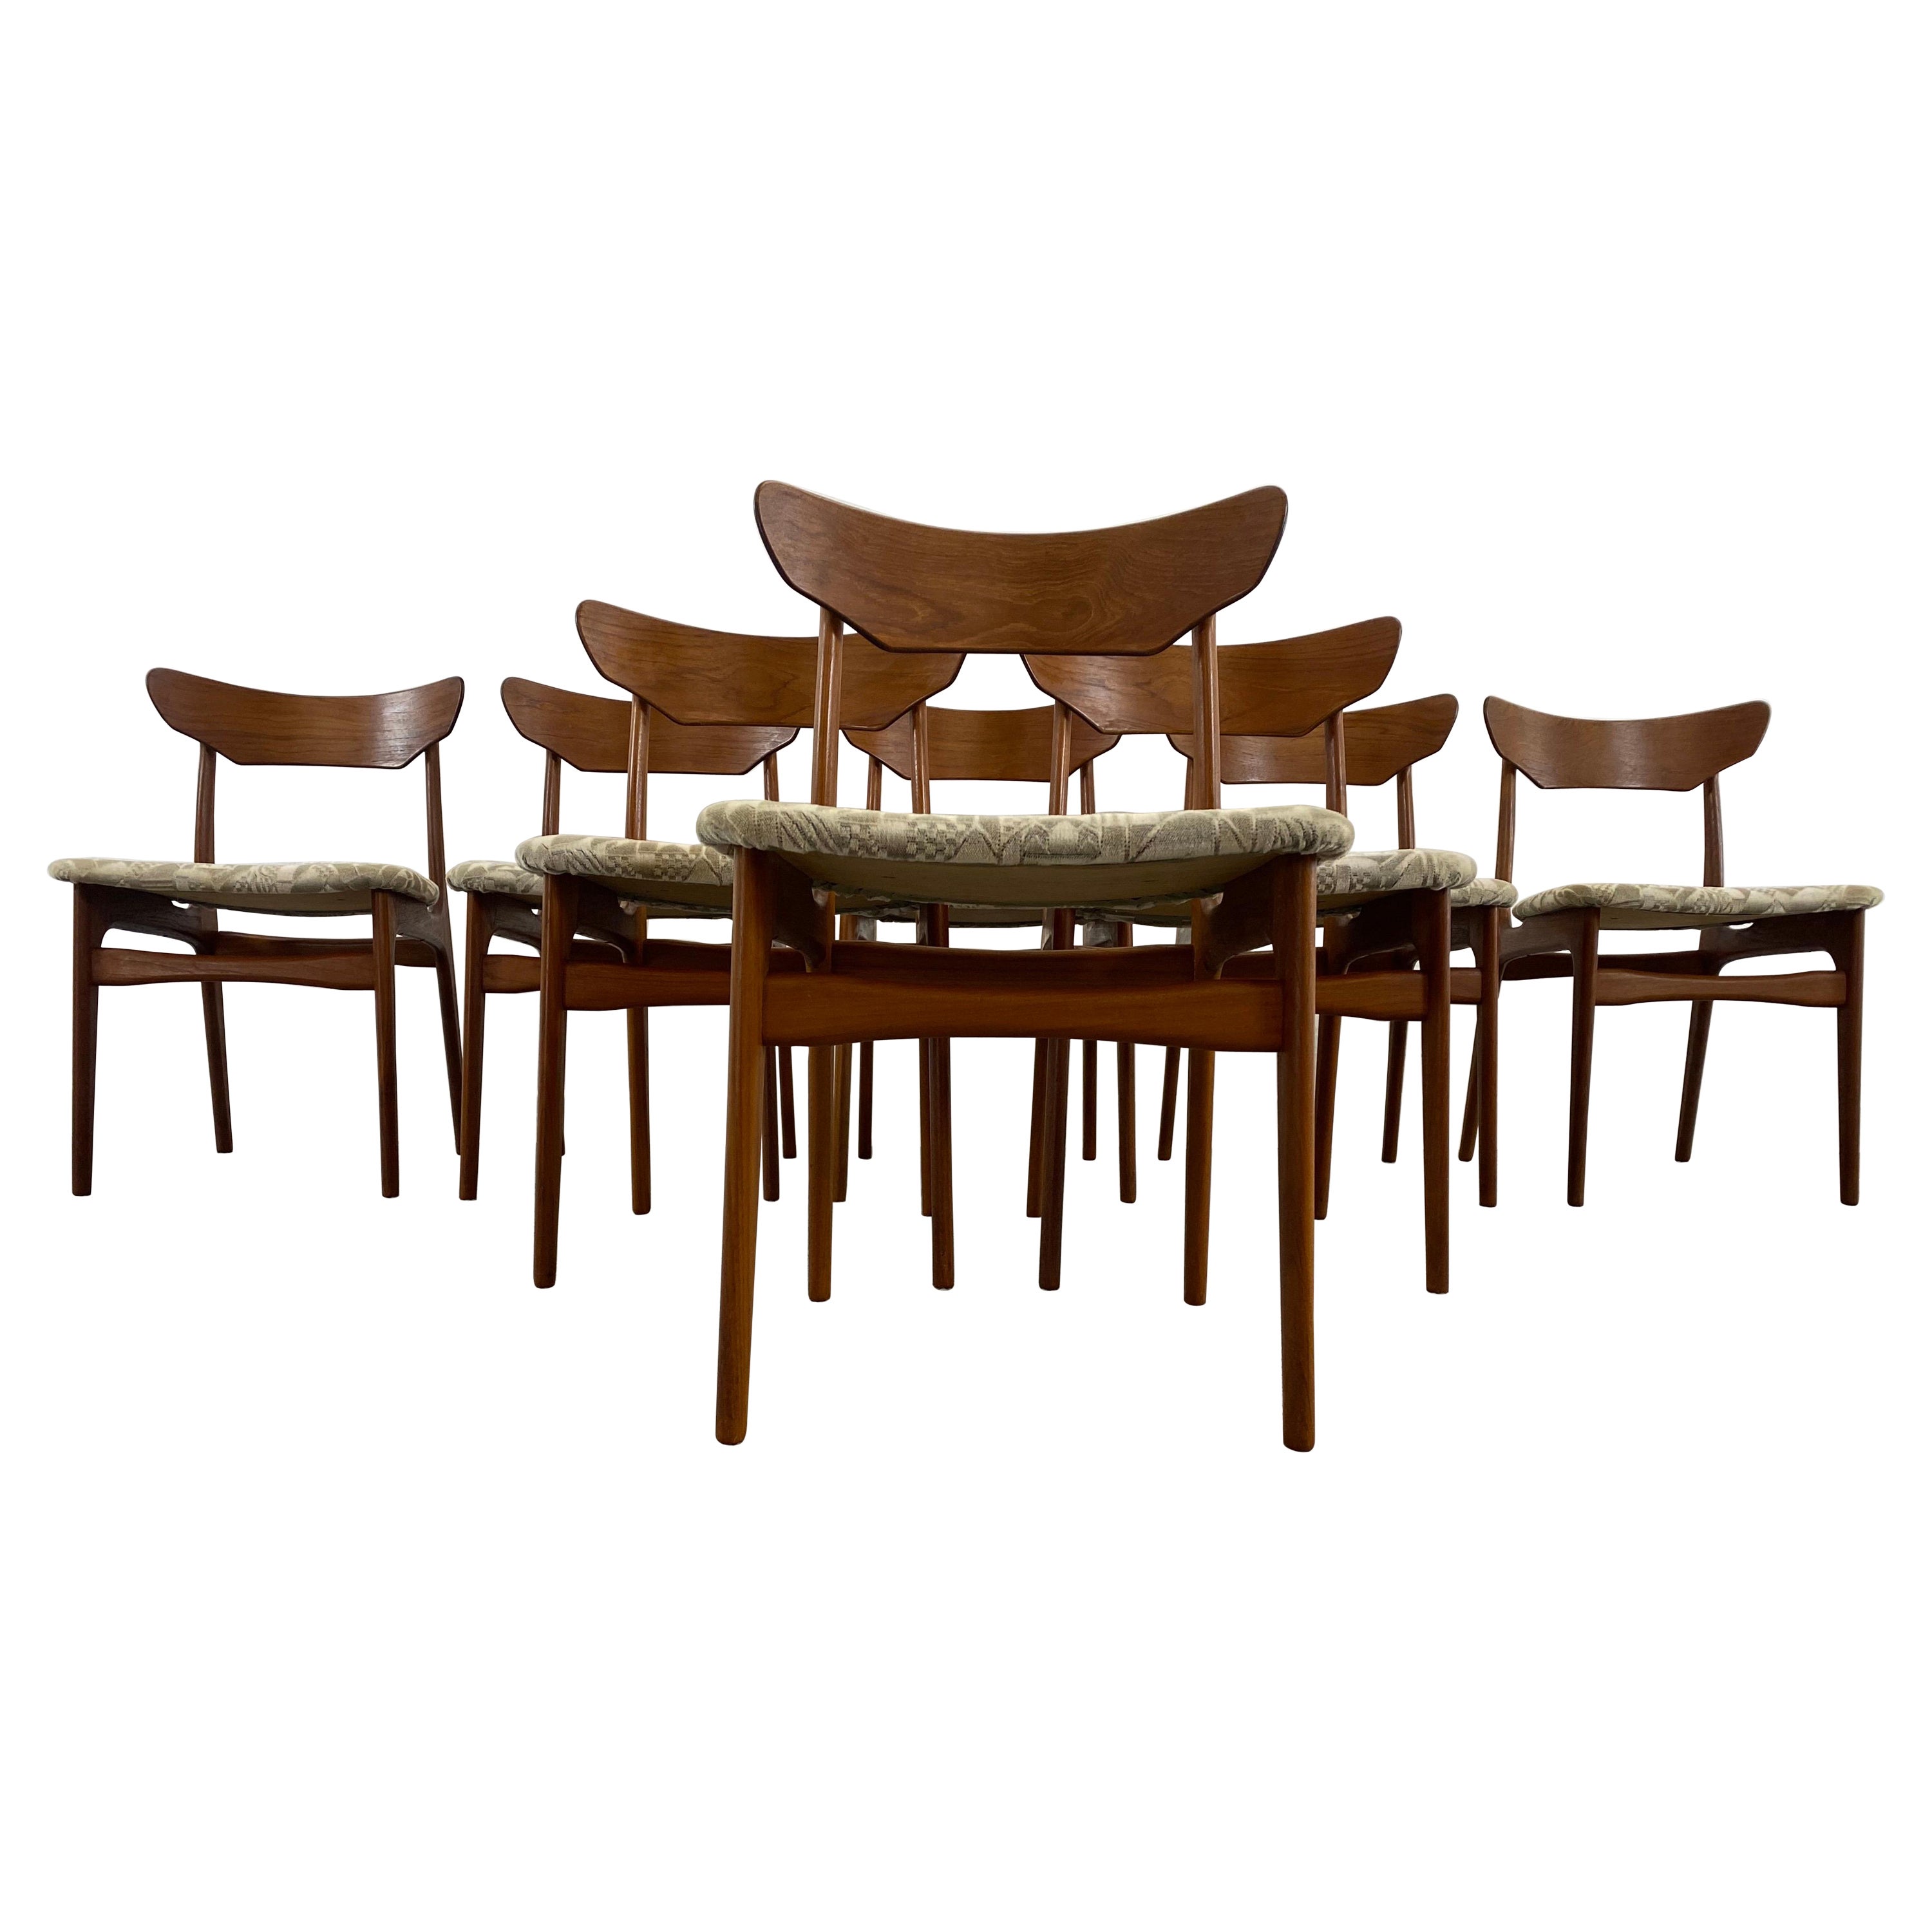 Set of 8 Midcentury Teak Dining Chairs from Schionning & Elgaard, Denmark, 1960s